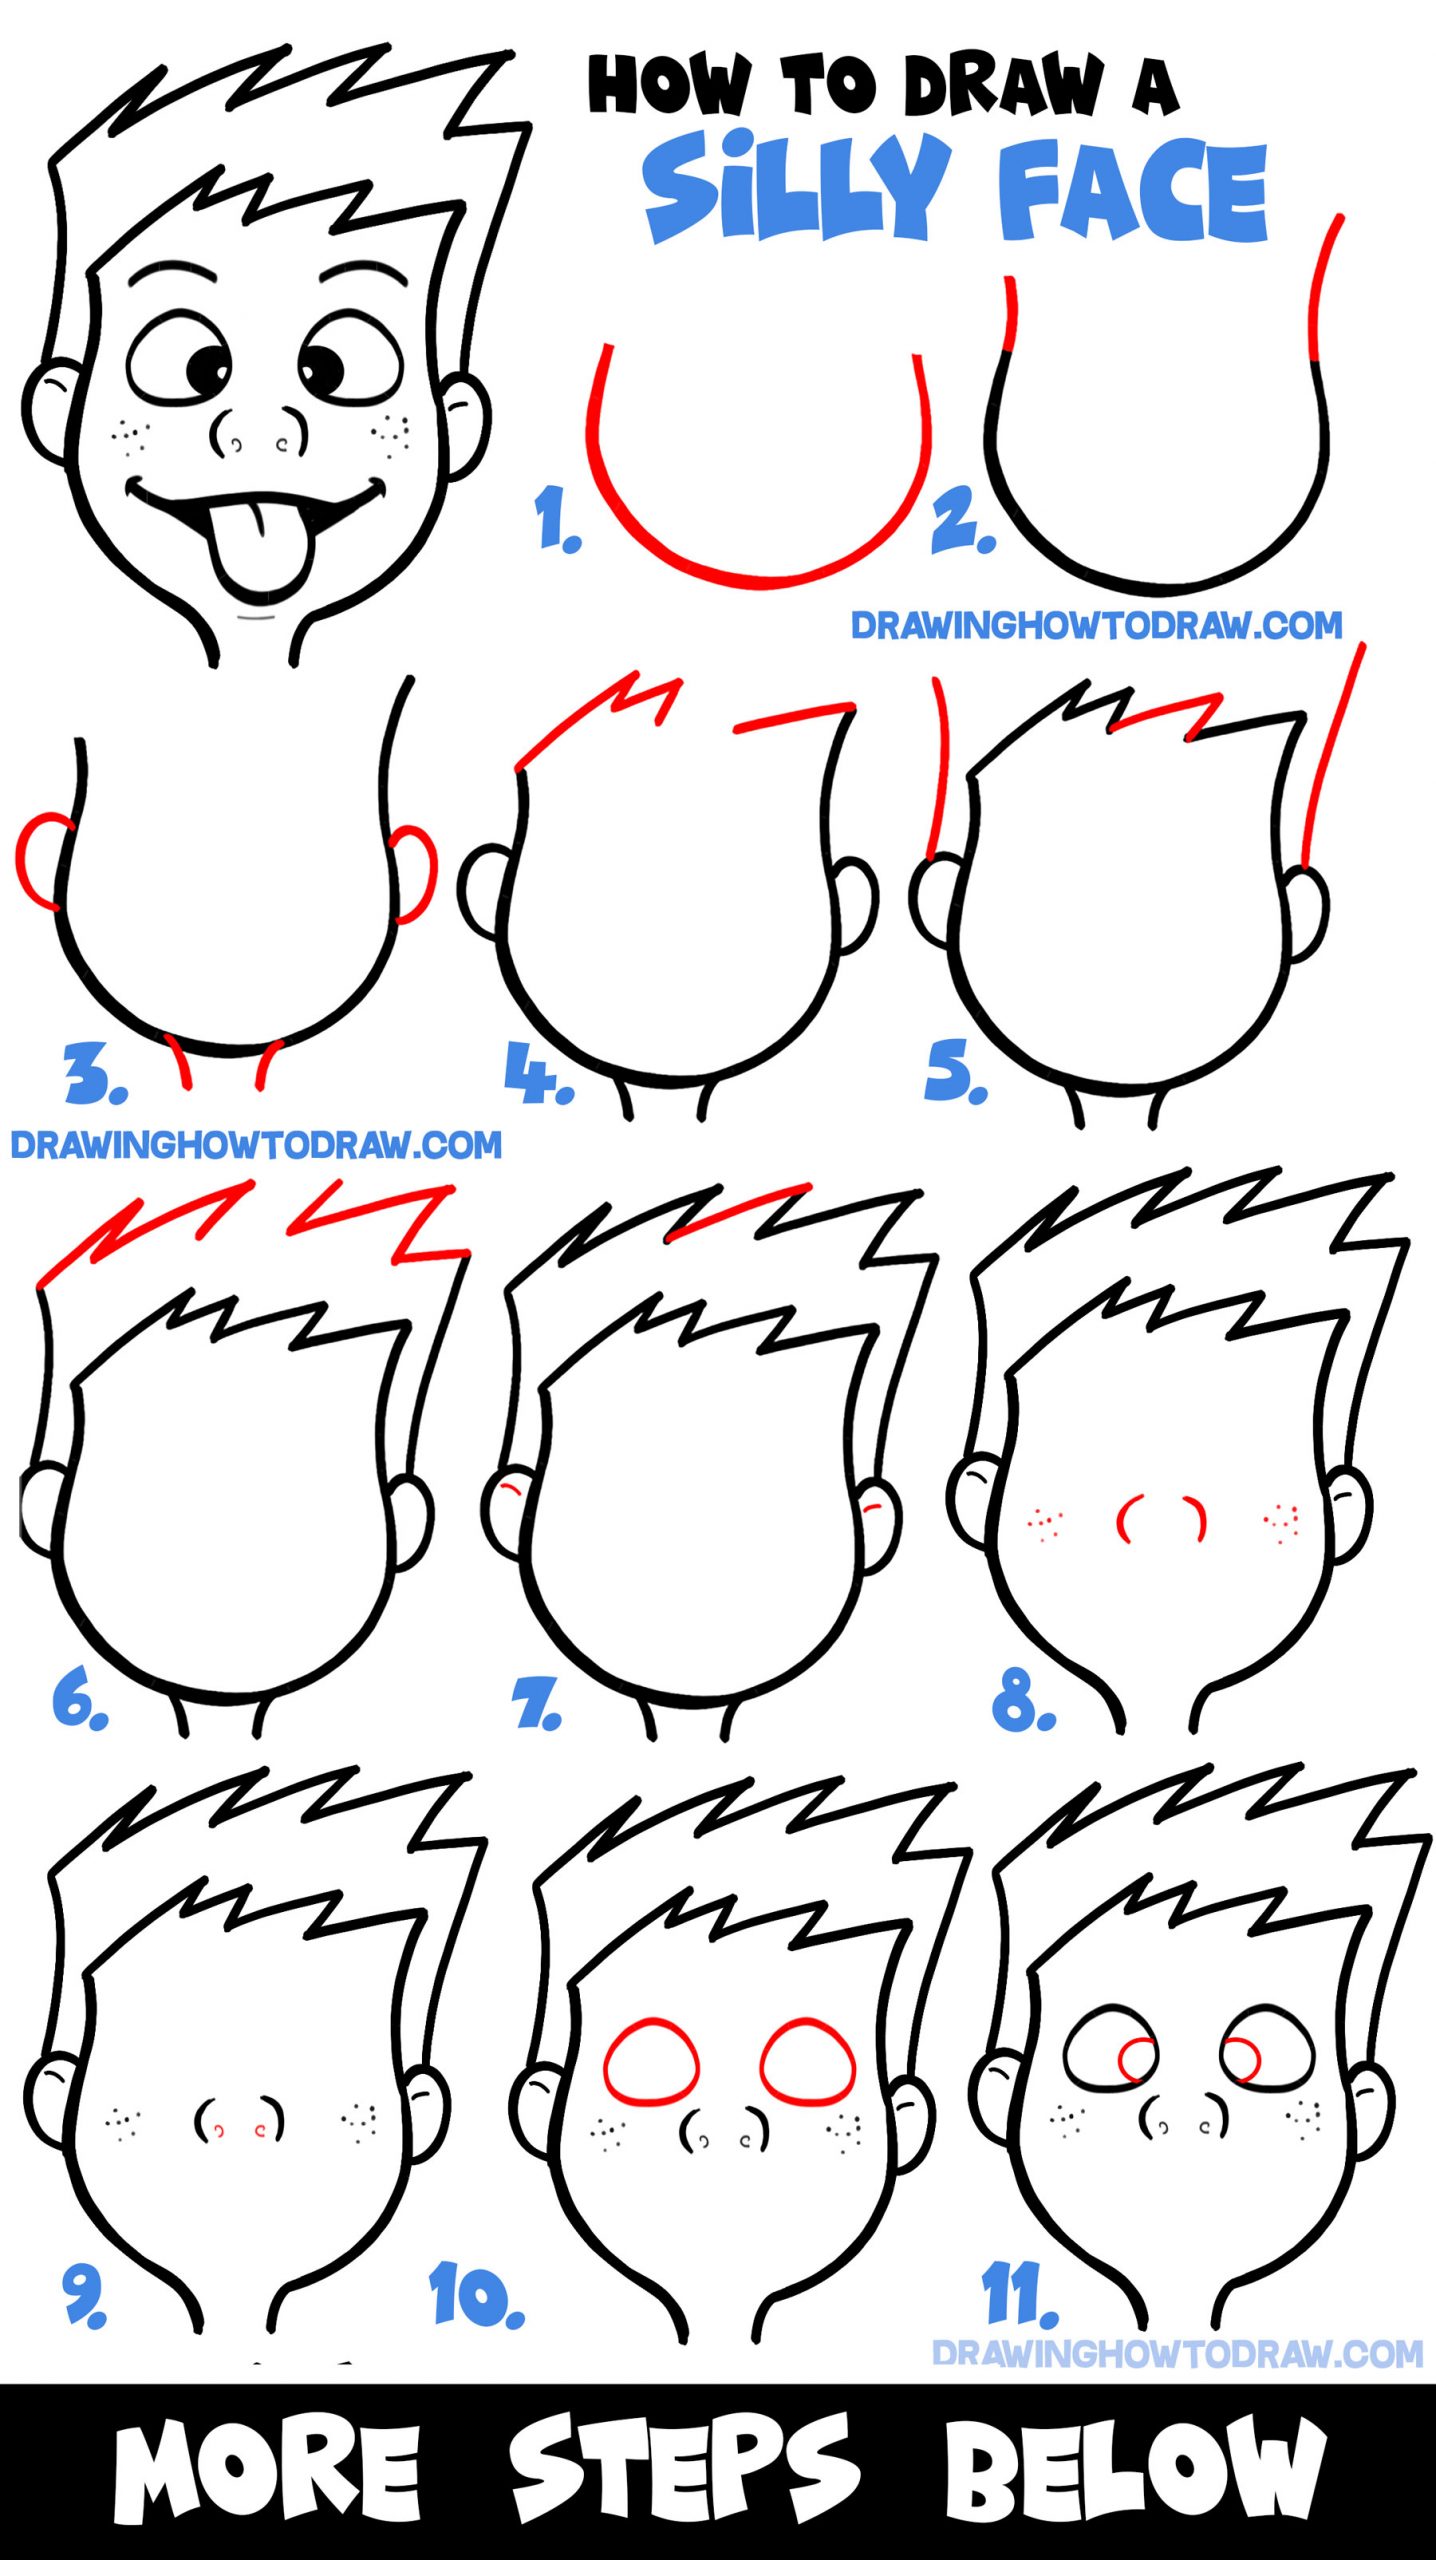 How to Draw Cartoon Facial Expressions : Silly Faces, Tongue Sticking Out -  How to Draw Step by Step Drawing Tutorials